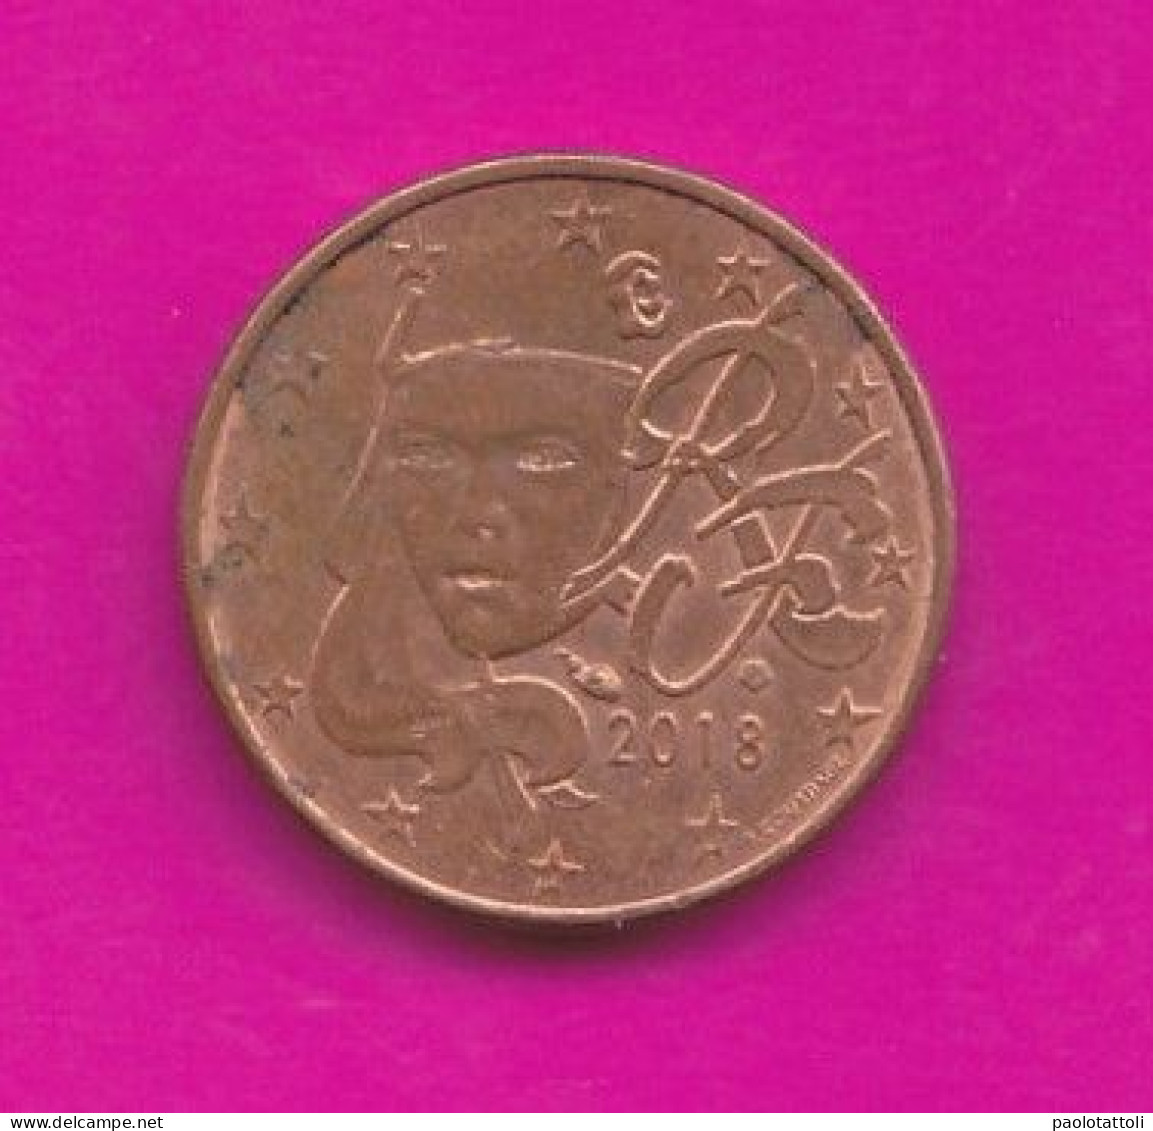 France, 2018- 1 Euro Cent- Mint Director Yves Sampoo- Copper Plated Steel- Obverse Marianne De Courtiade. - France